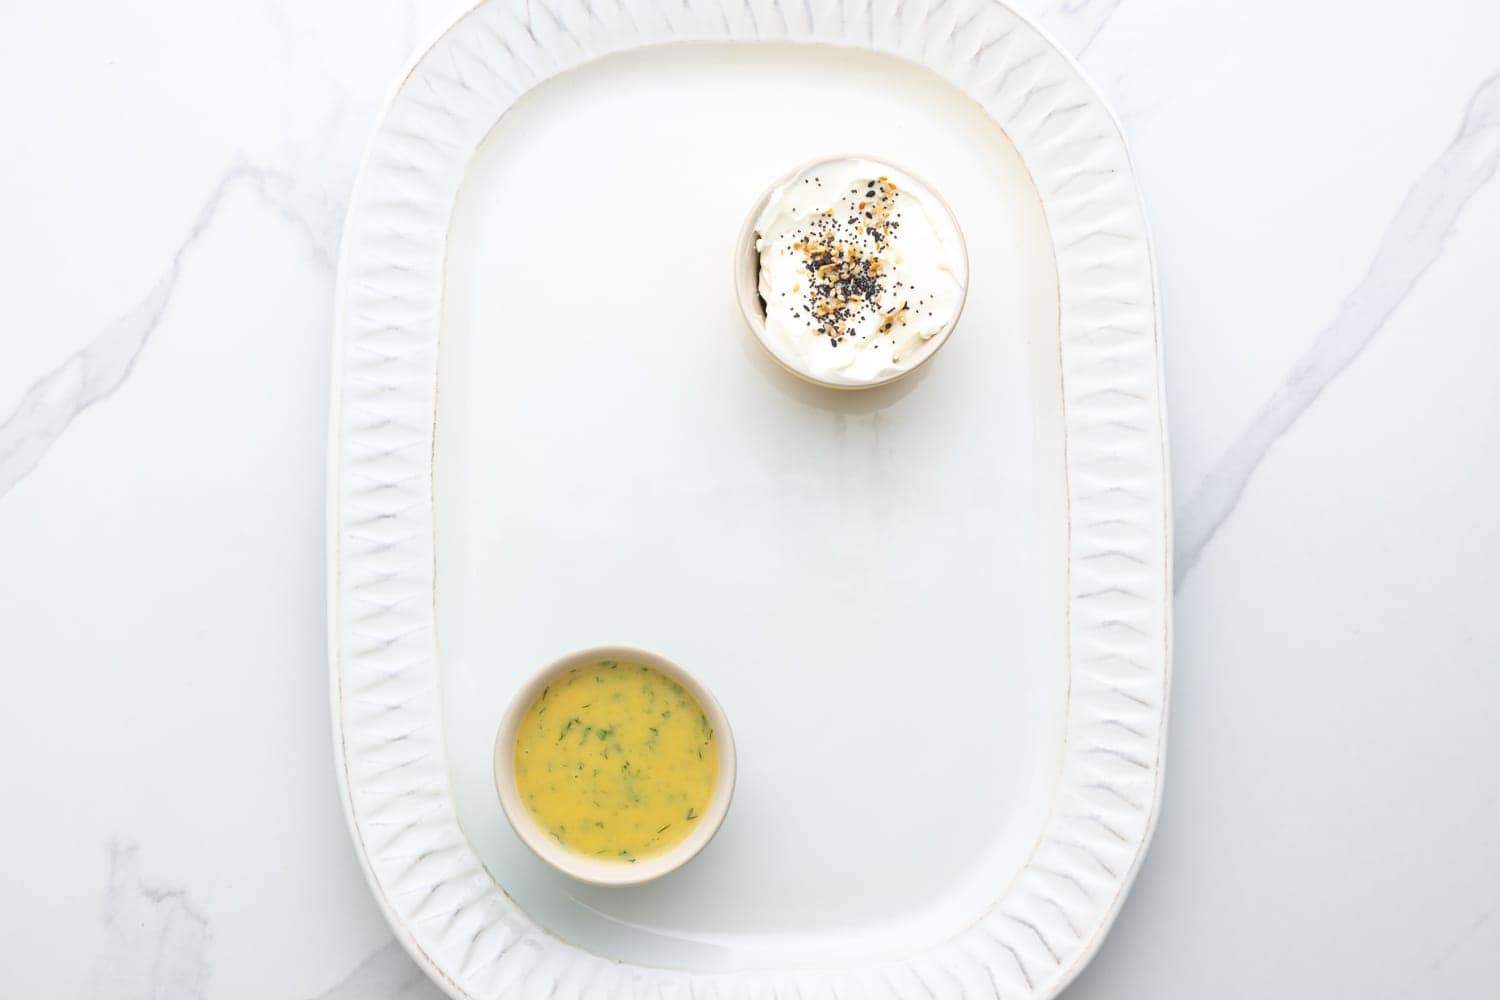 A rounded rectangular platter holding a small bowl of cream cheese with everything bagel seasoning and a small bowl of dill mustard sauce.